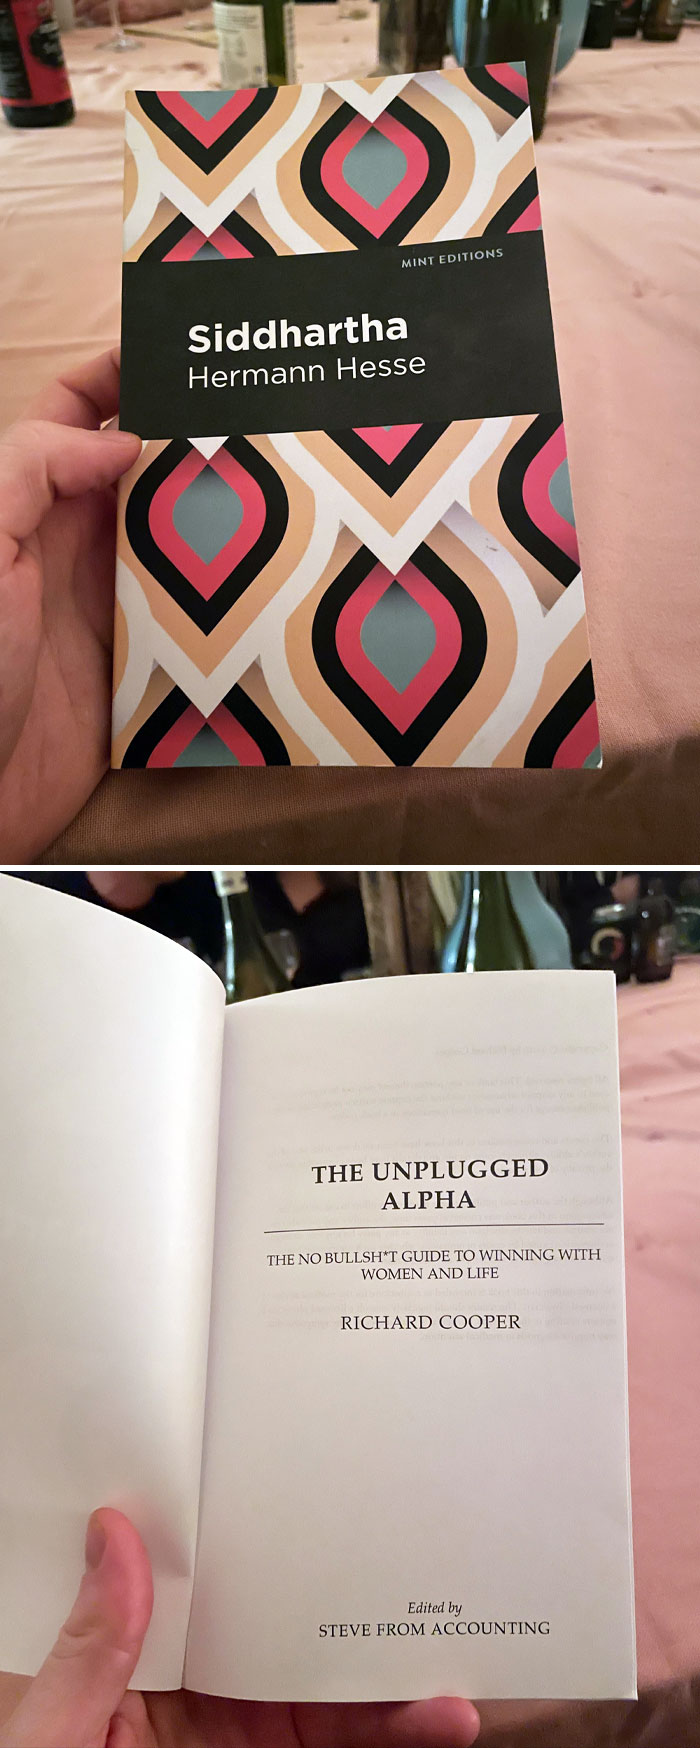 My Friend Ordered Siddhartha, A Novel About Buddhist Enlightenment, From Amazon And It Was Misprinted With A Red Pill Self-Help Guide Called "The Unplugged Alpha"